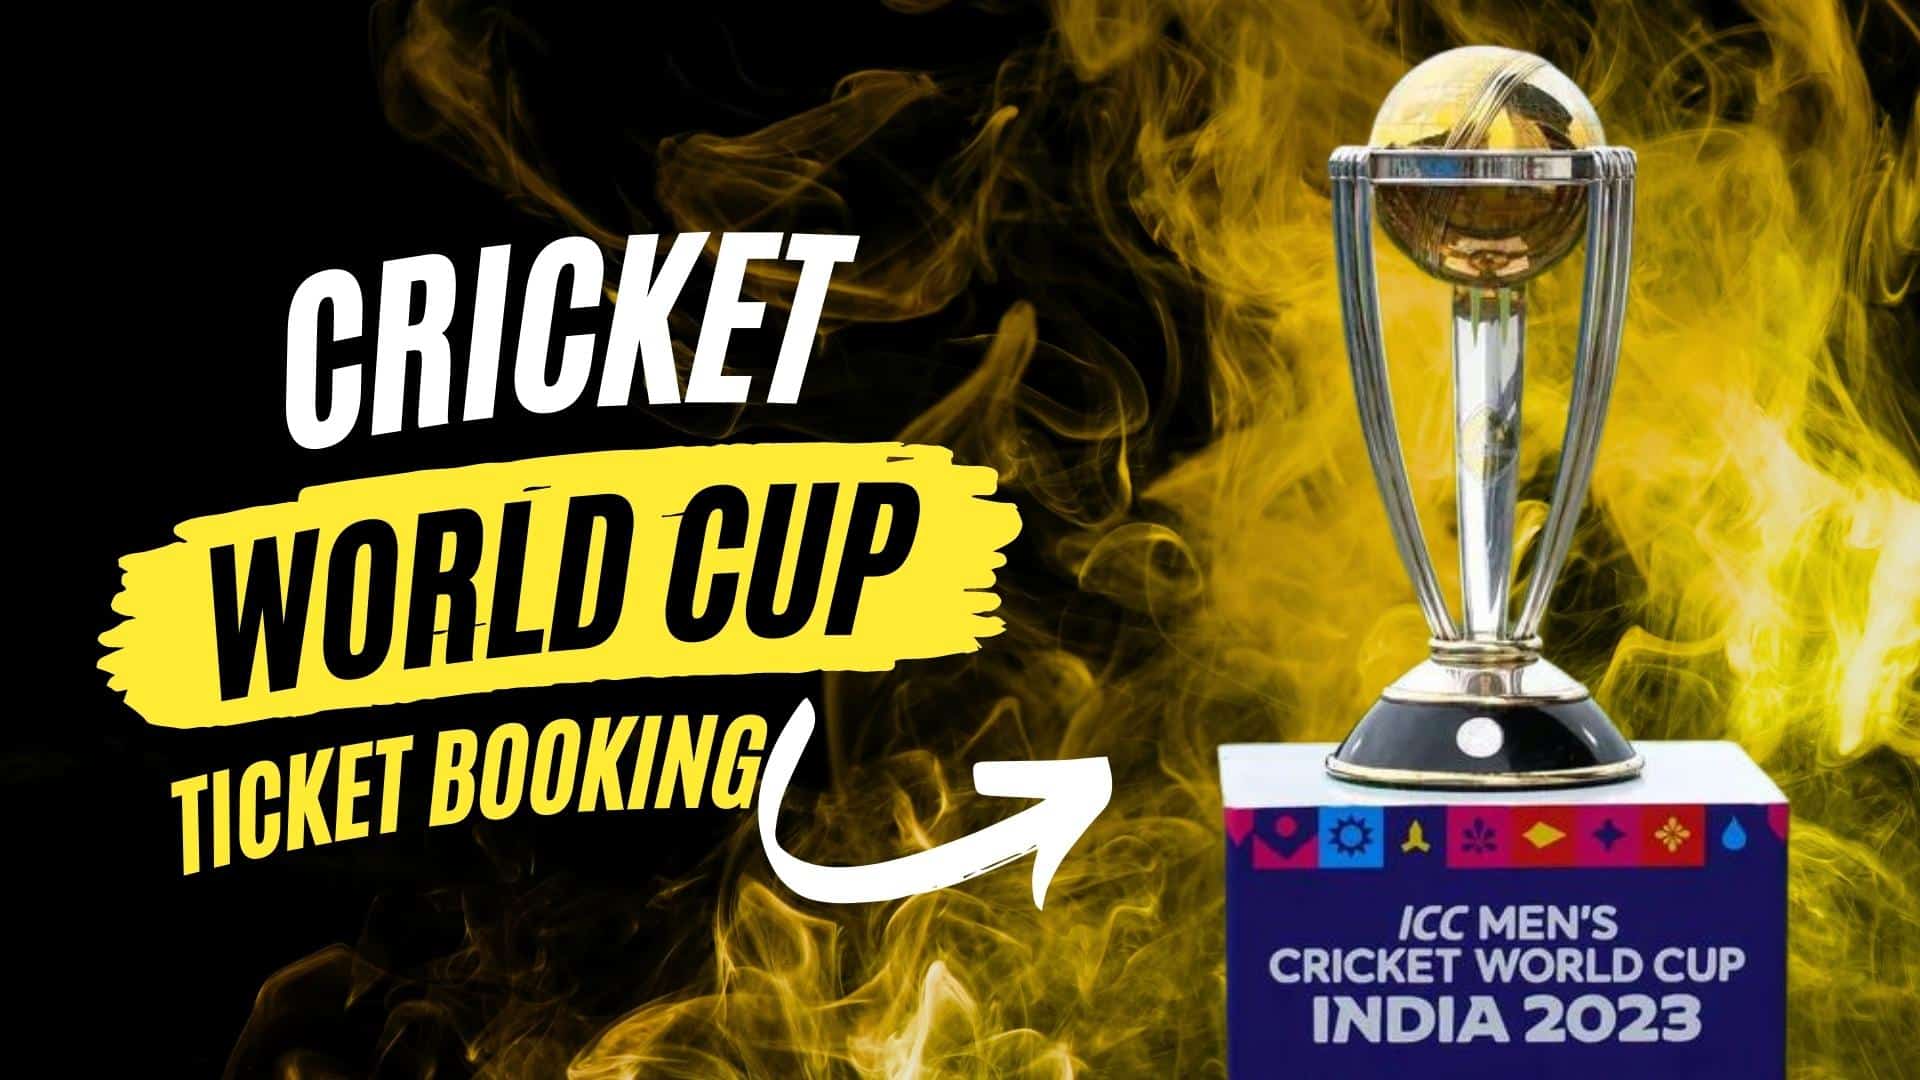 ICC Men's Cricket World Cup 2023 Ticket Booking Guide